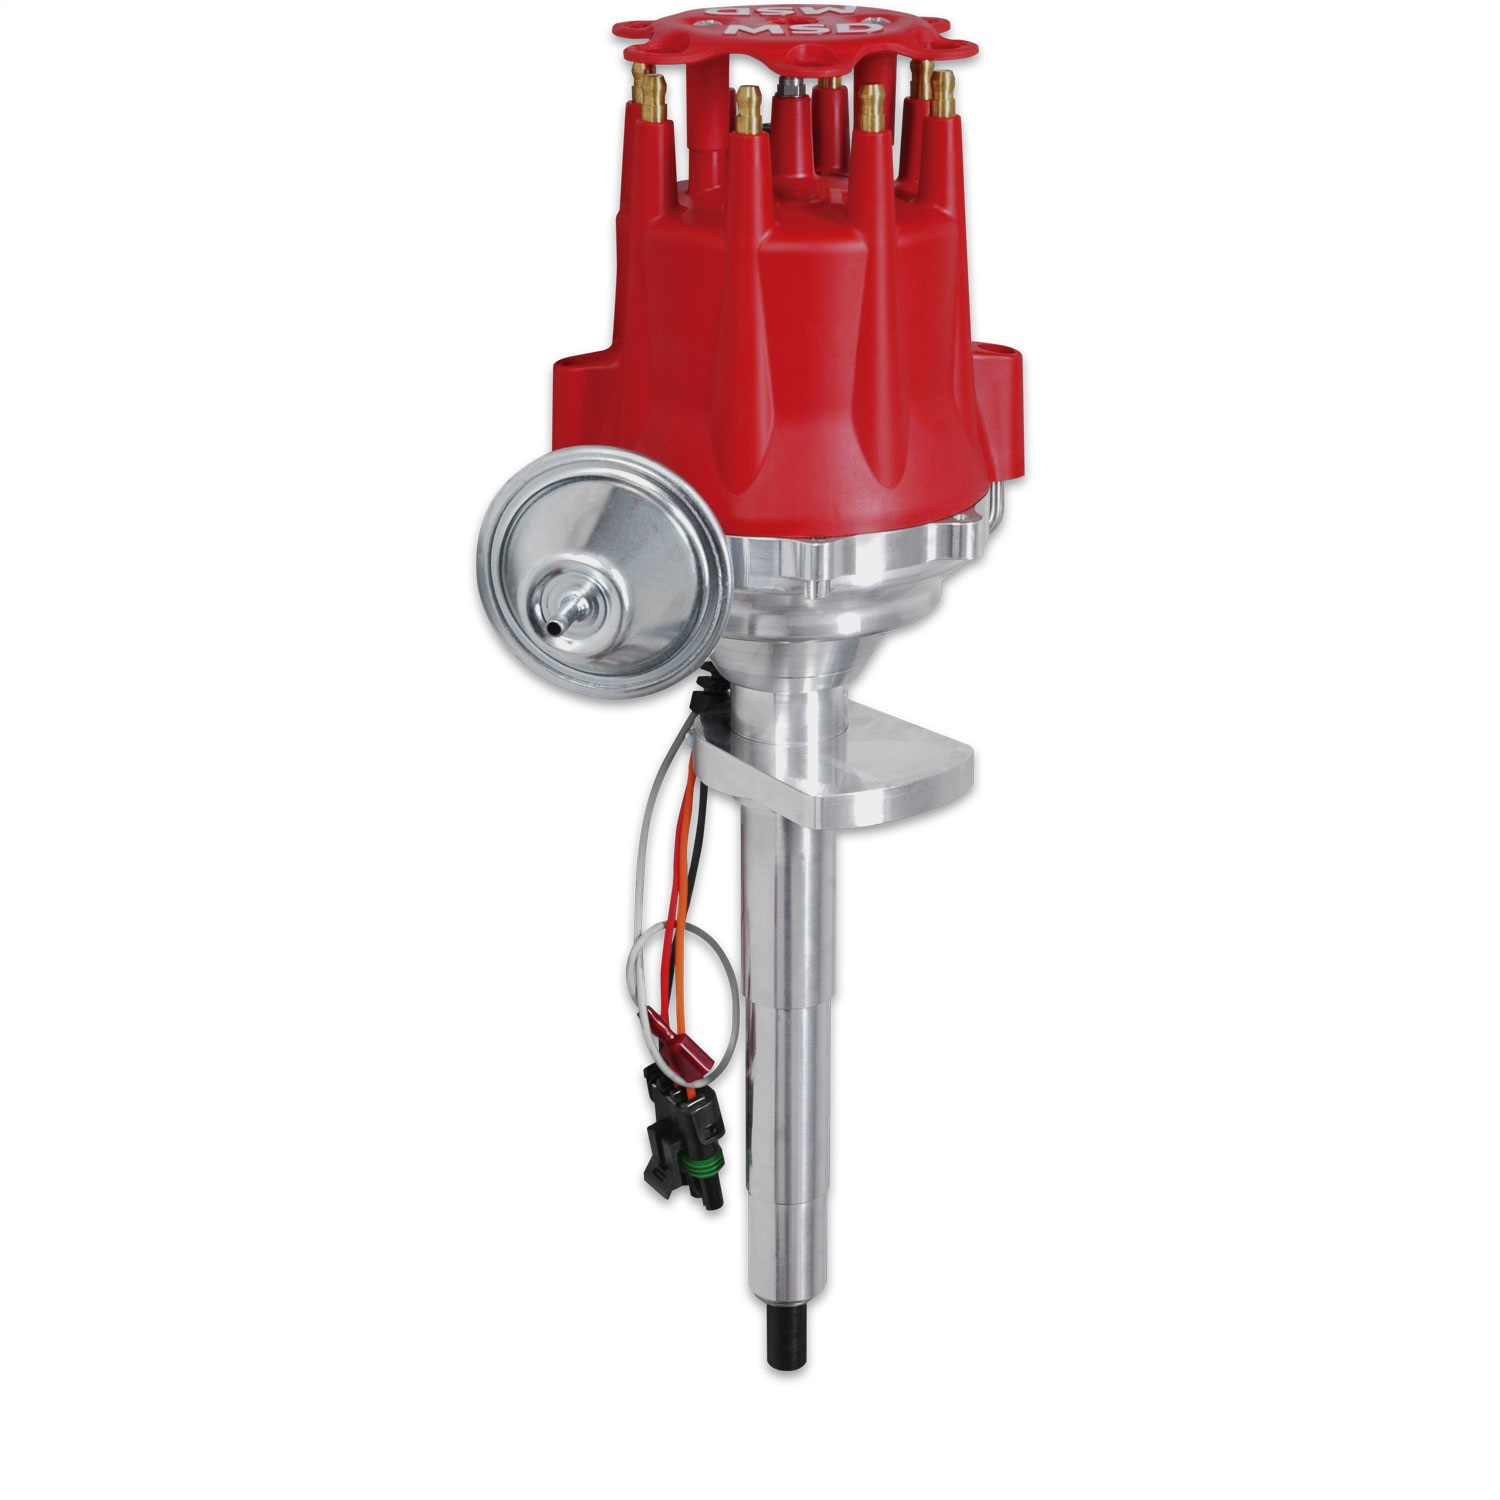 Details About Msd Ignition 8573 Ready-To-Run Distributor